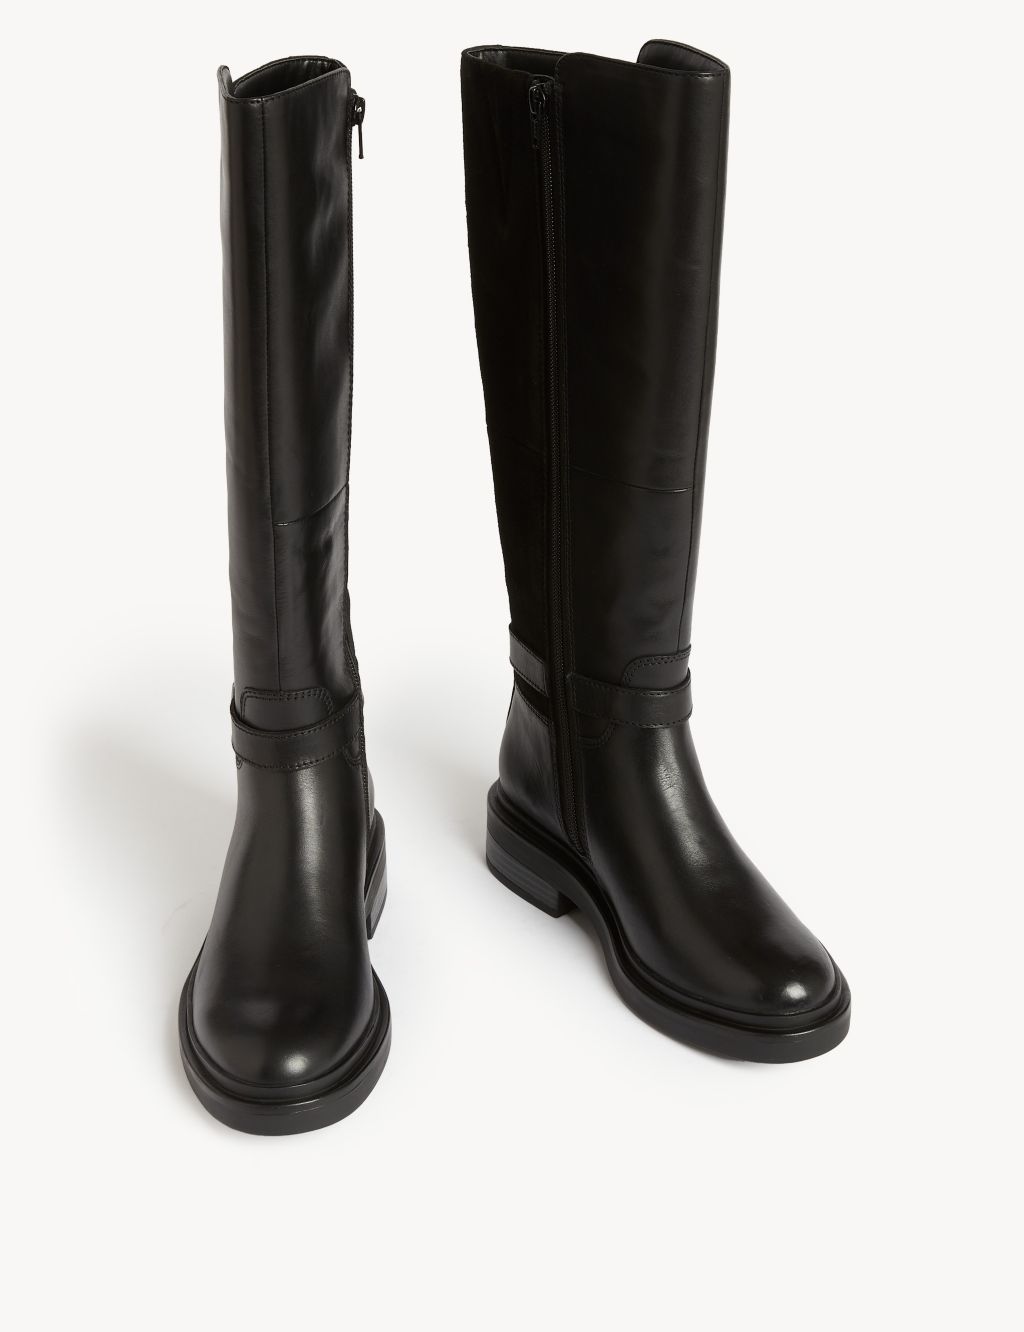 Wide Fit Leather Riding Knee High Boots image 2